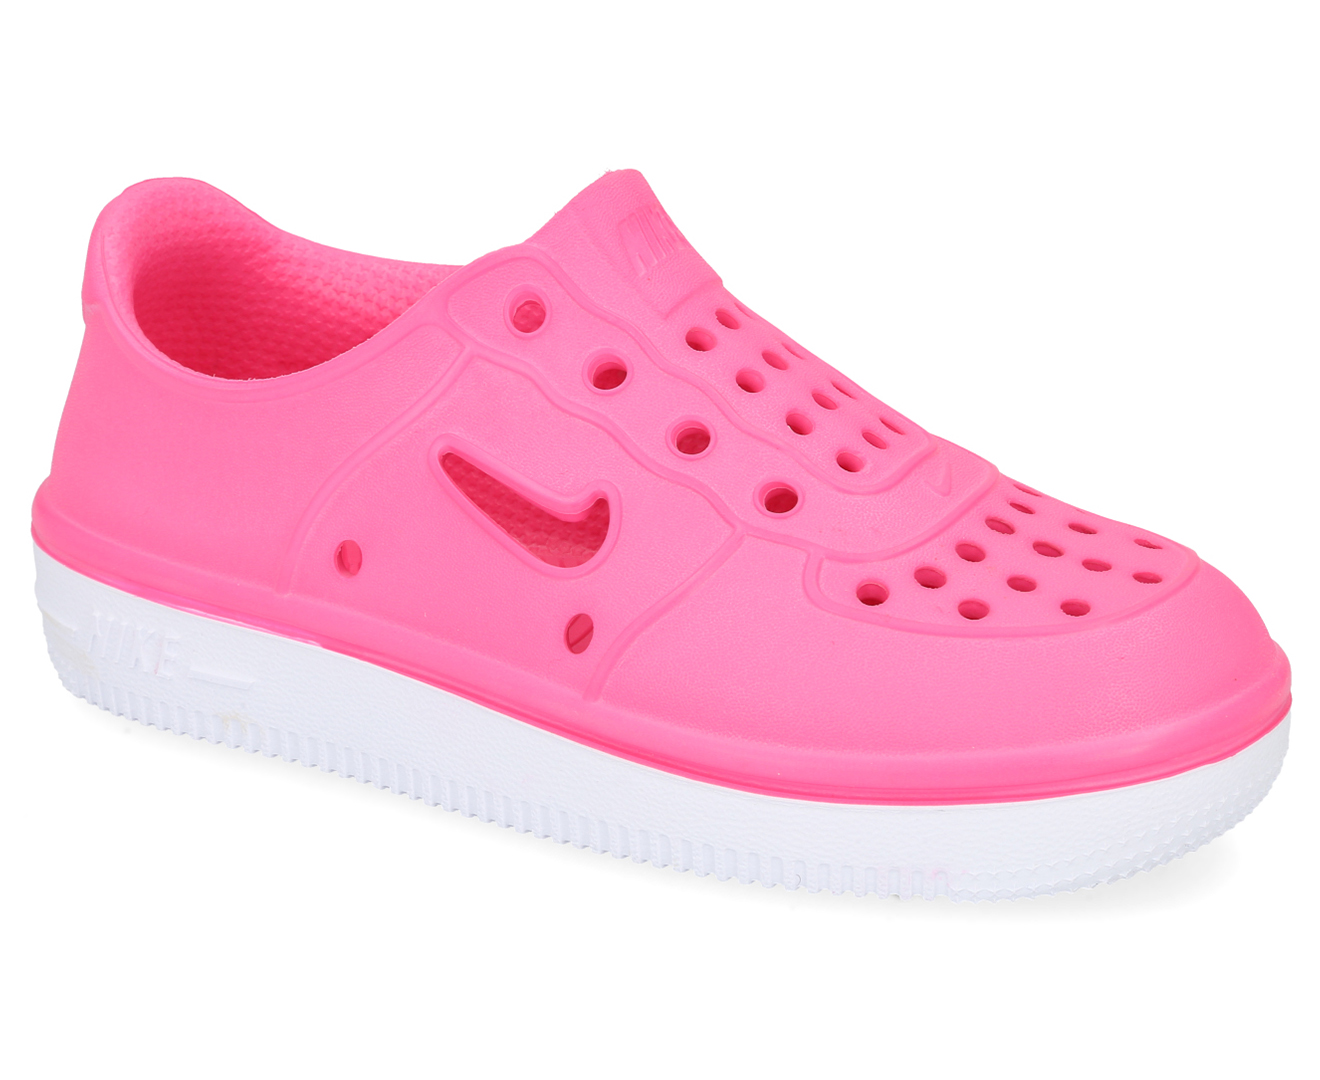 Nike Younger Girls' Foam Force 1 Slip-On Shoes - Hyper Pink/White ...